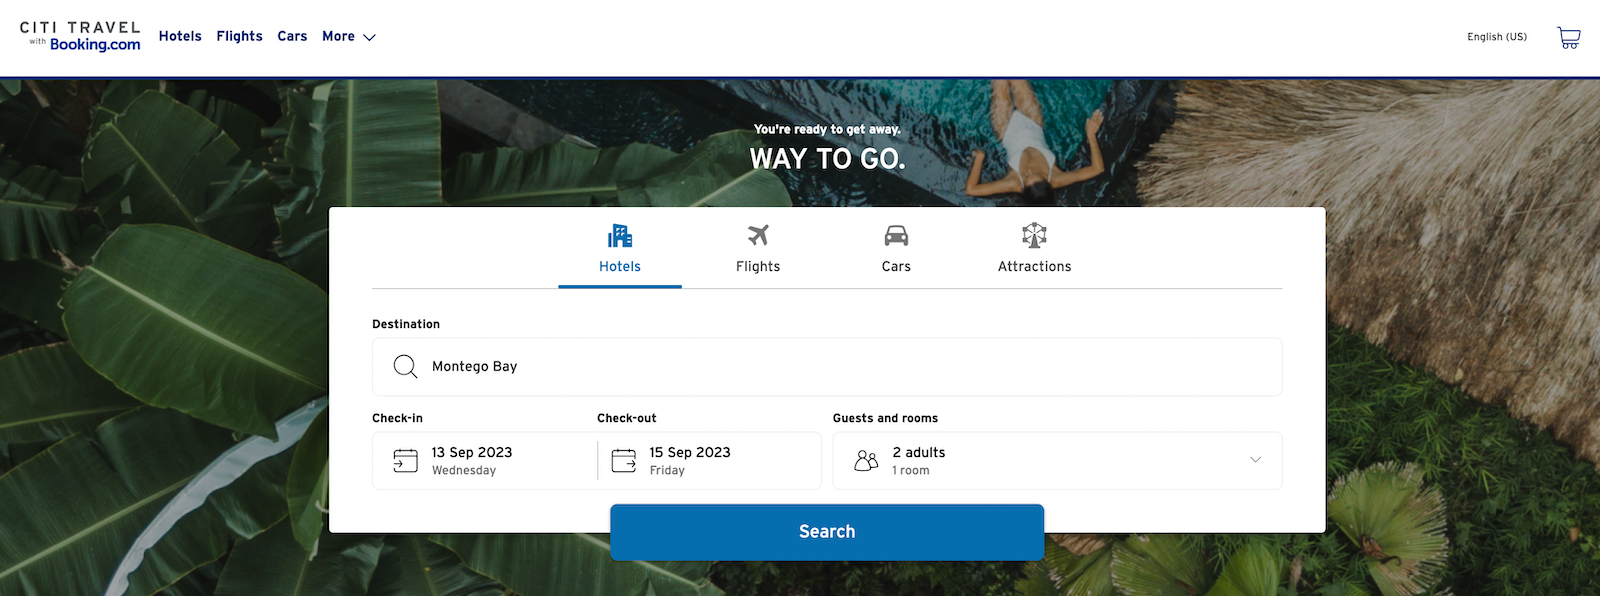 The hotels tab is selected on a travel booking page